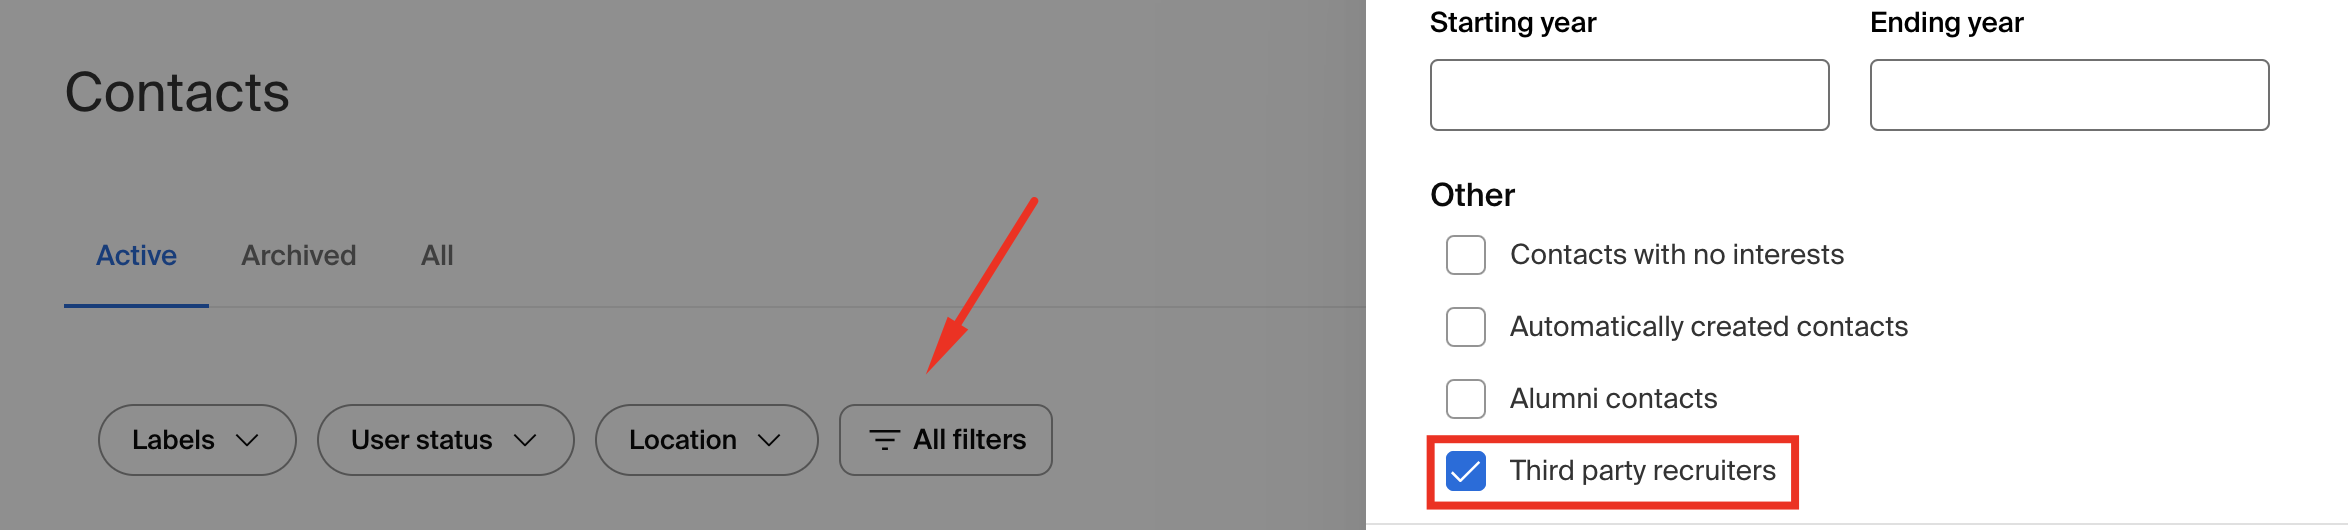 Third Party Recruiters filter on Contacts Overview page.png